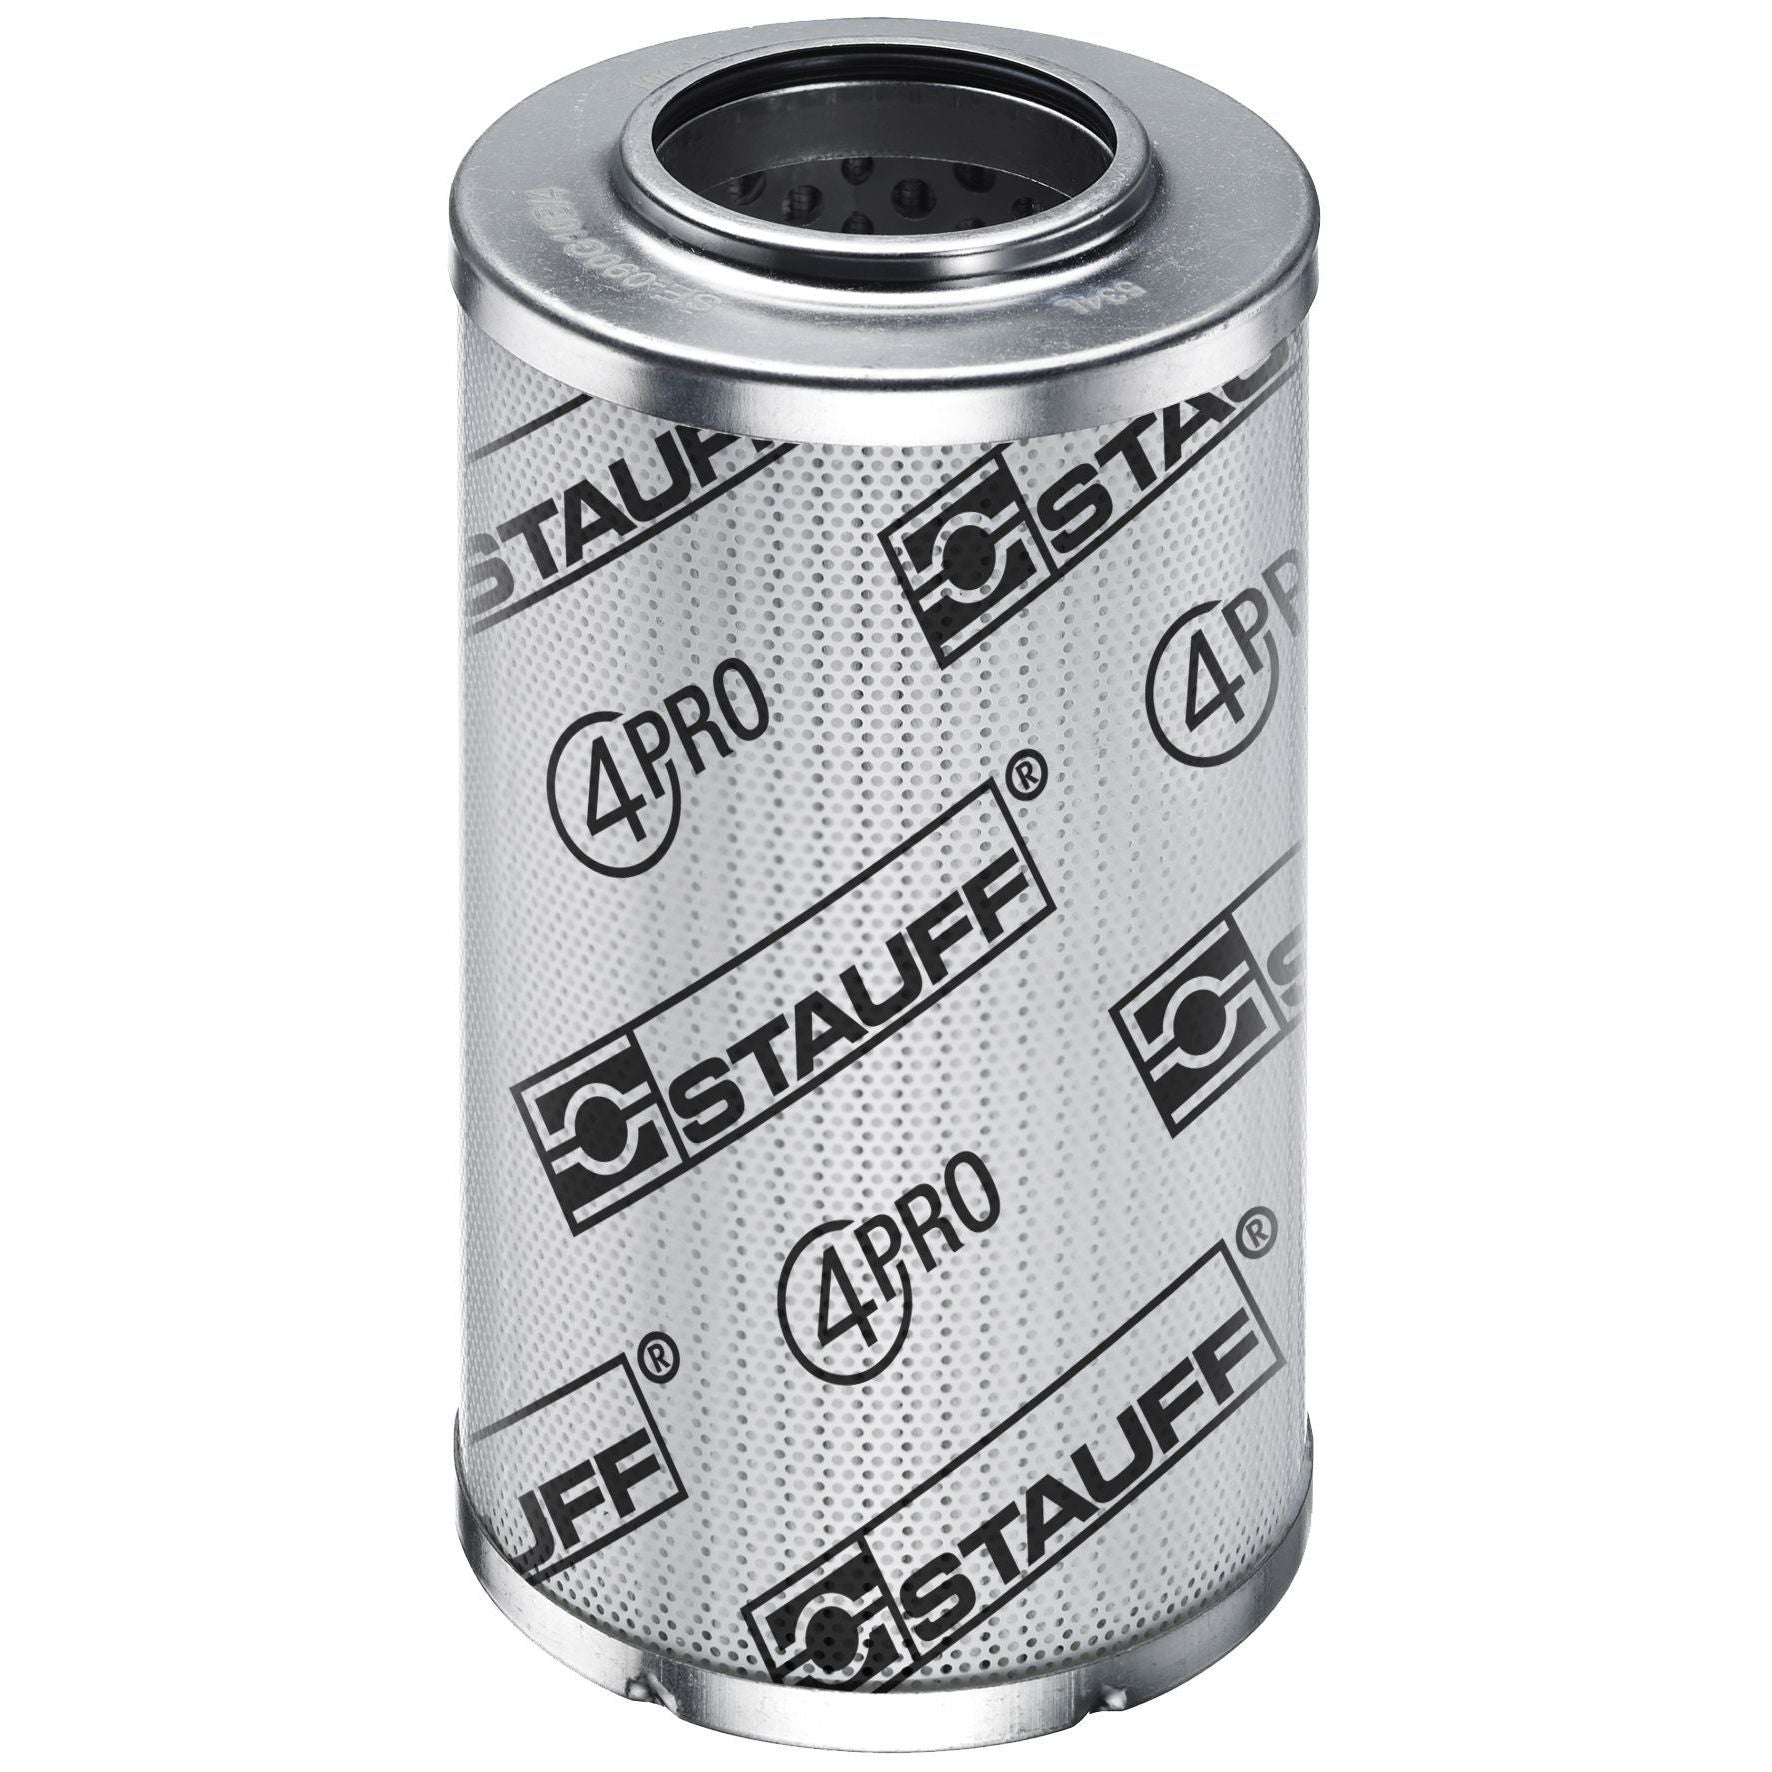 SE-030-H-05-E/4 : Stauff SF-030 Series Filter Element, 5 Micron, Synthetic, 3045psi Collapse Differential, EPDM Seals